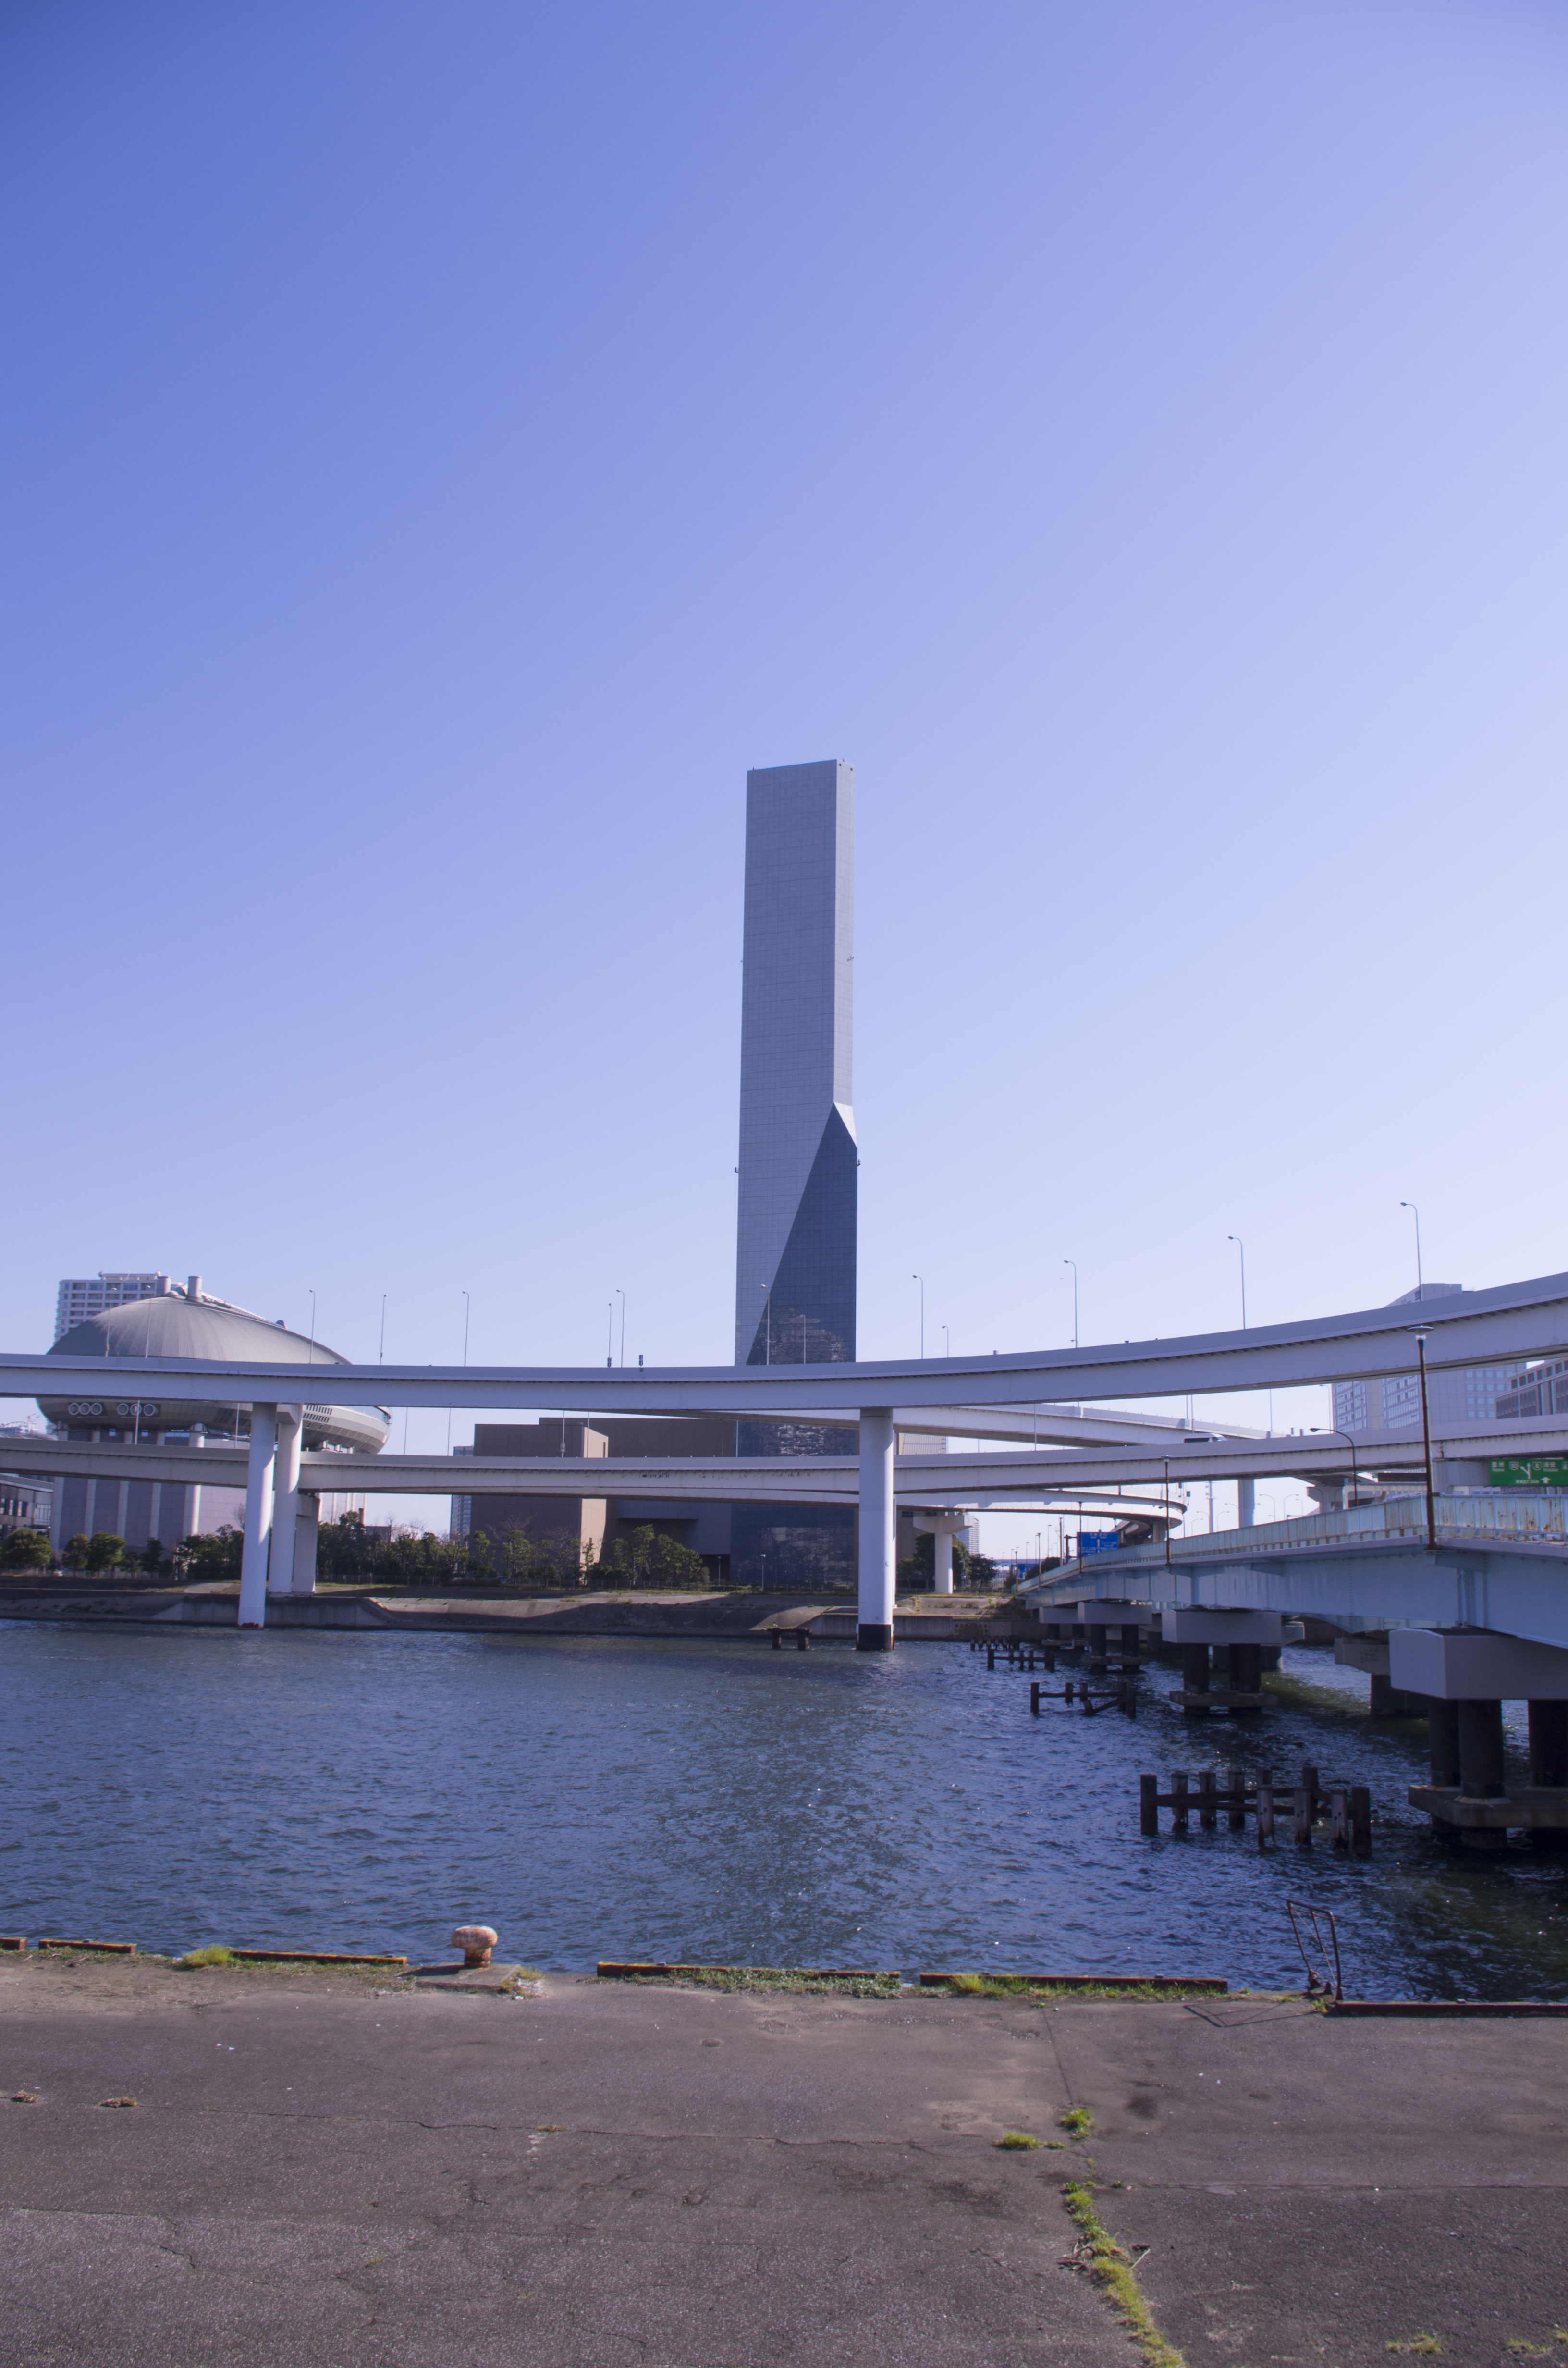 This is actually quite an interesting design for a chimney, it belongs to the Ariake Incineration Plant